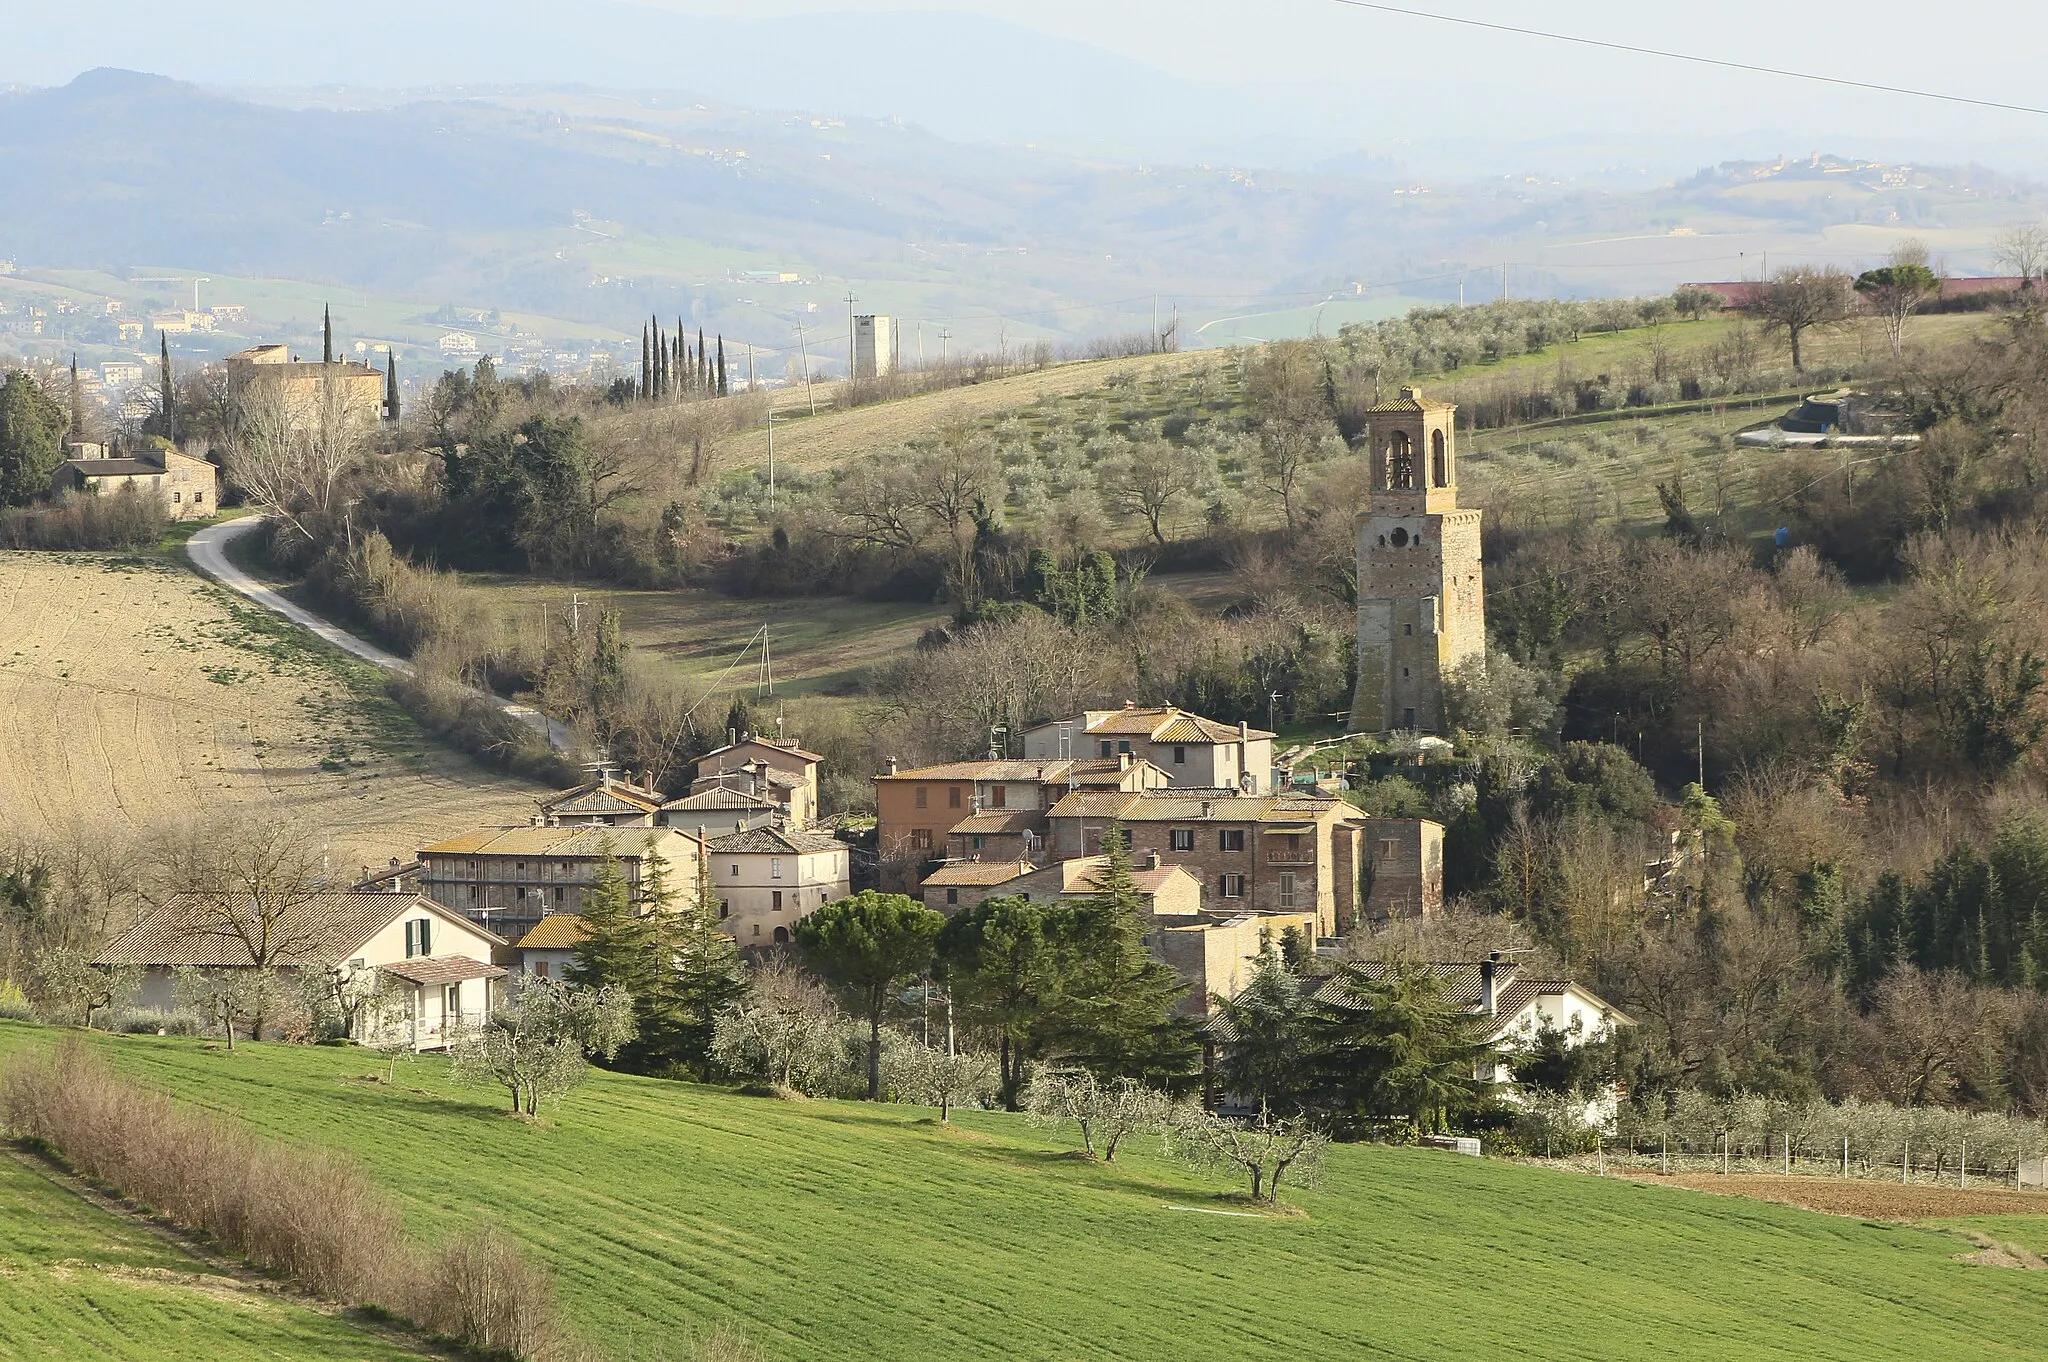 Photo showing: Papiano, hamlet of Marsciano, Province of Perugia, Umbria, Italy